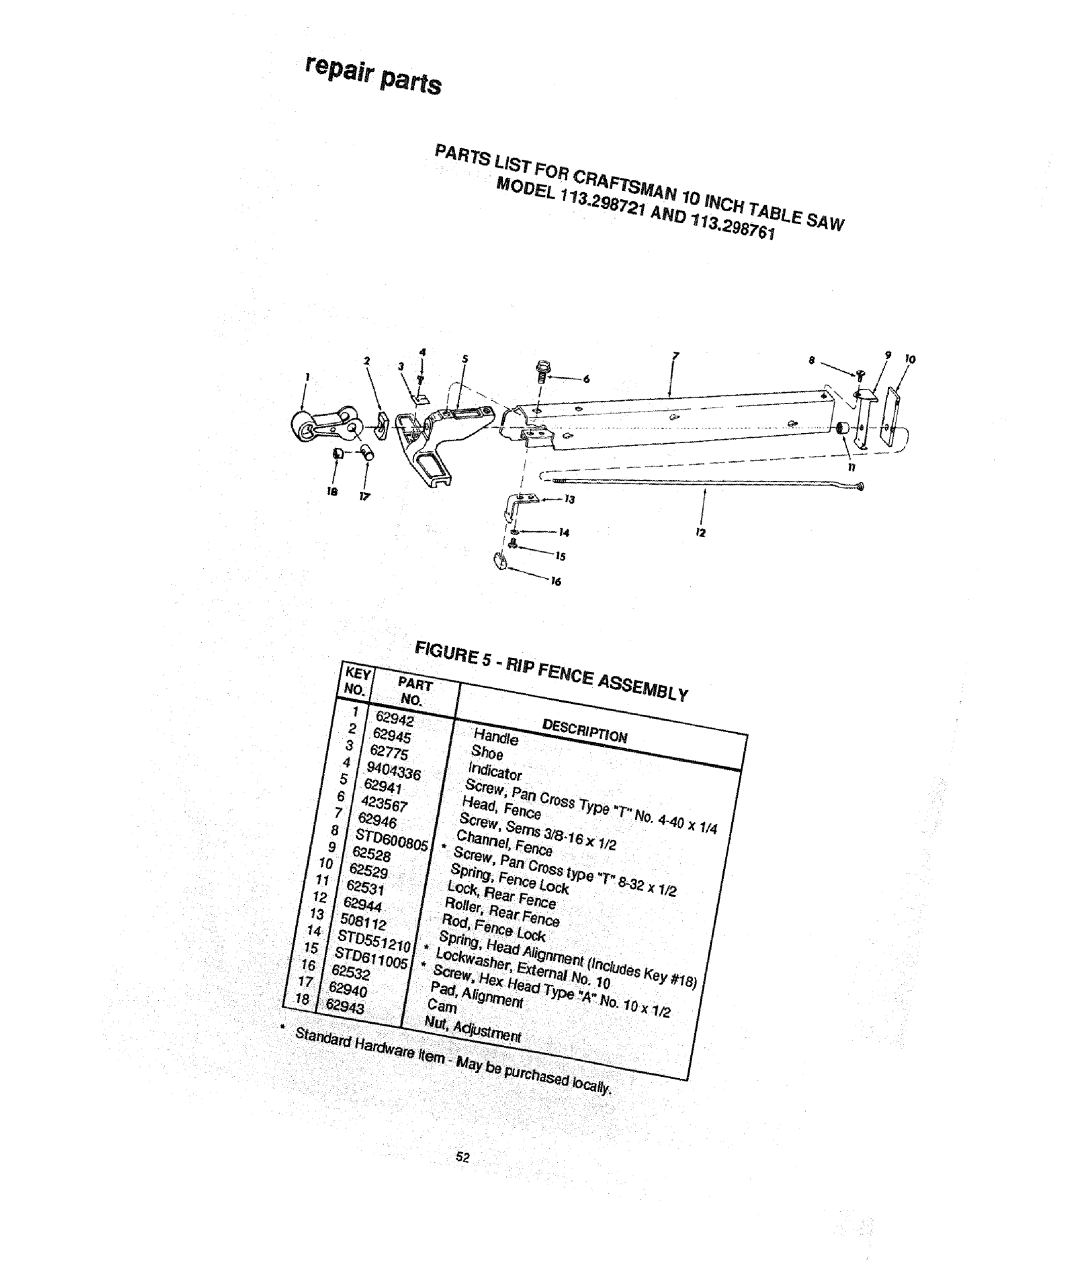 Craftsman 298721 manual repair Parts, MODEL 173.2S872AND l,.2987S, PARTs LIST FOR CRAFTSMAN 10 iNCH TABLE. SAW, x 1/2 